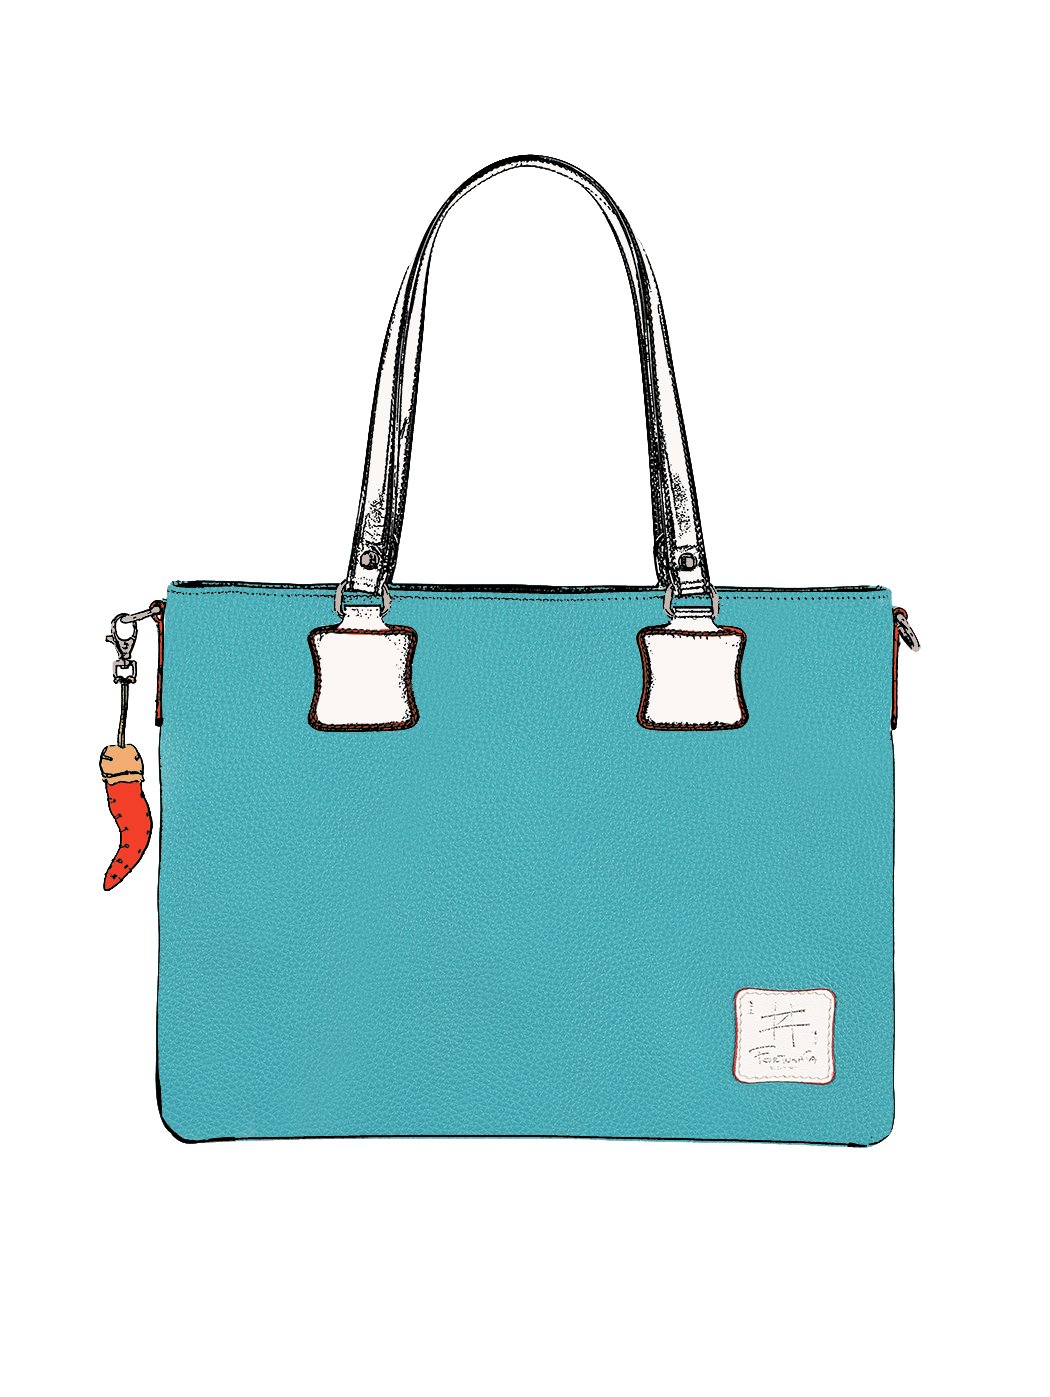 Dooney and bourke Pale blue Small Lexington Tote